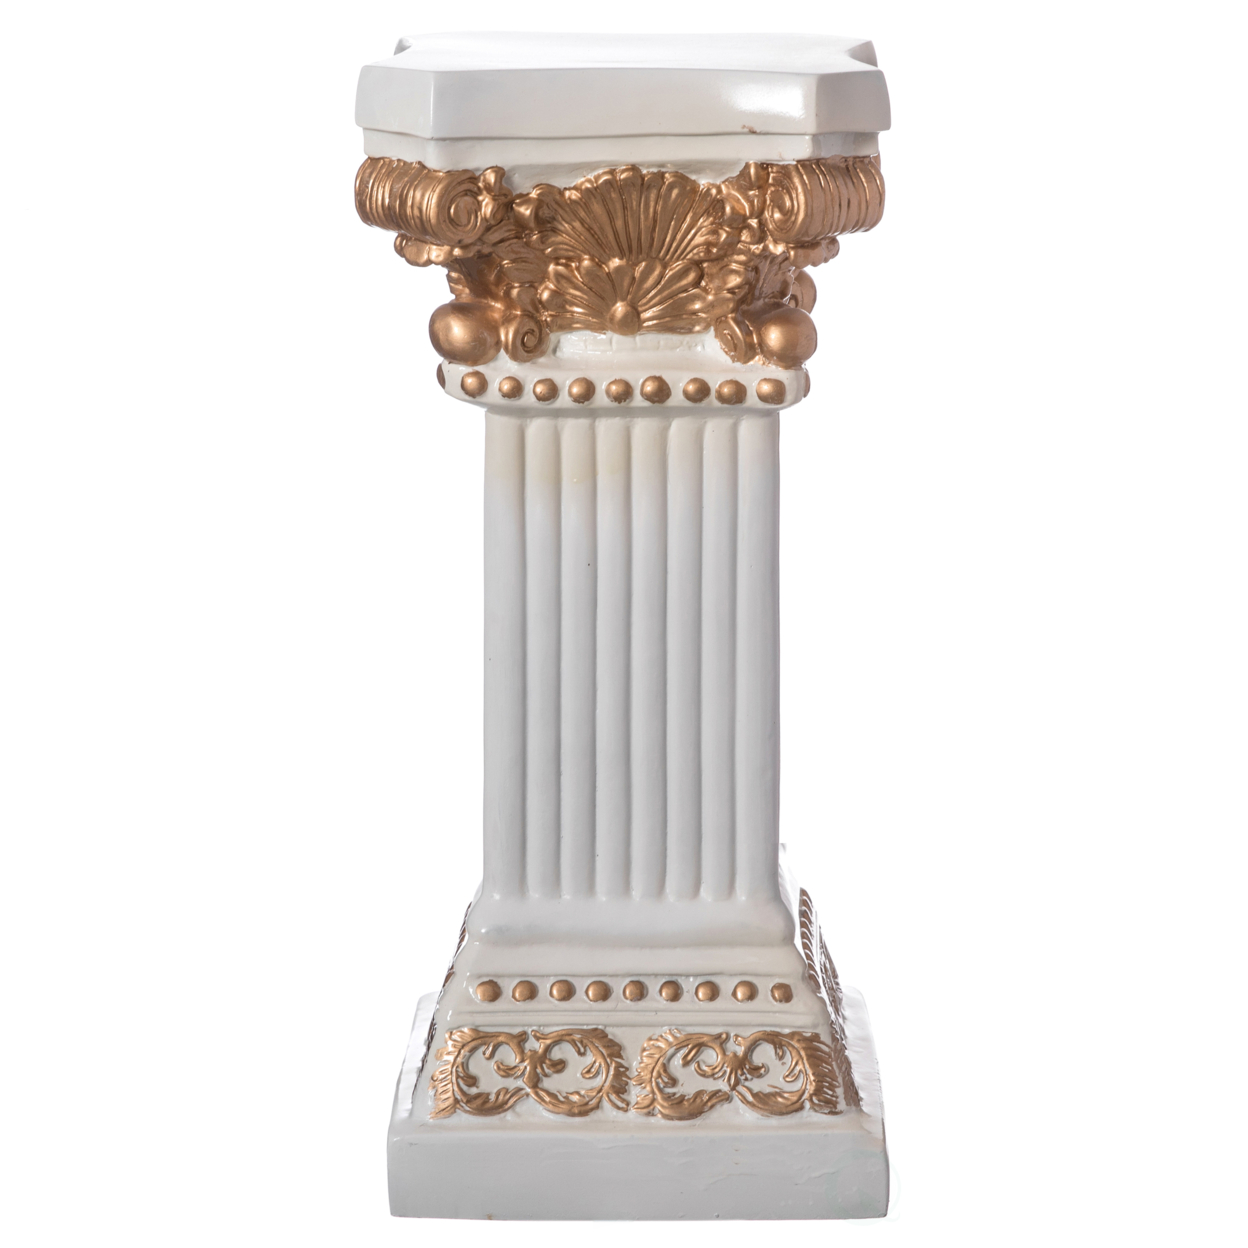 Decorative Modern Fiberglass White And Gold Plinth Roman Style Column Ionic Pedestal Vase Stand For Wedding, Living Room, Or Dining Room - 3